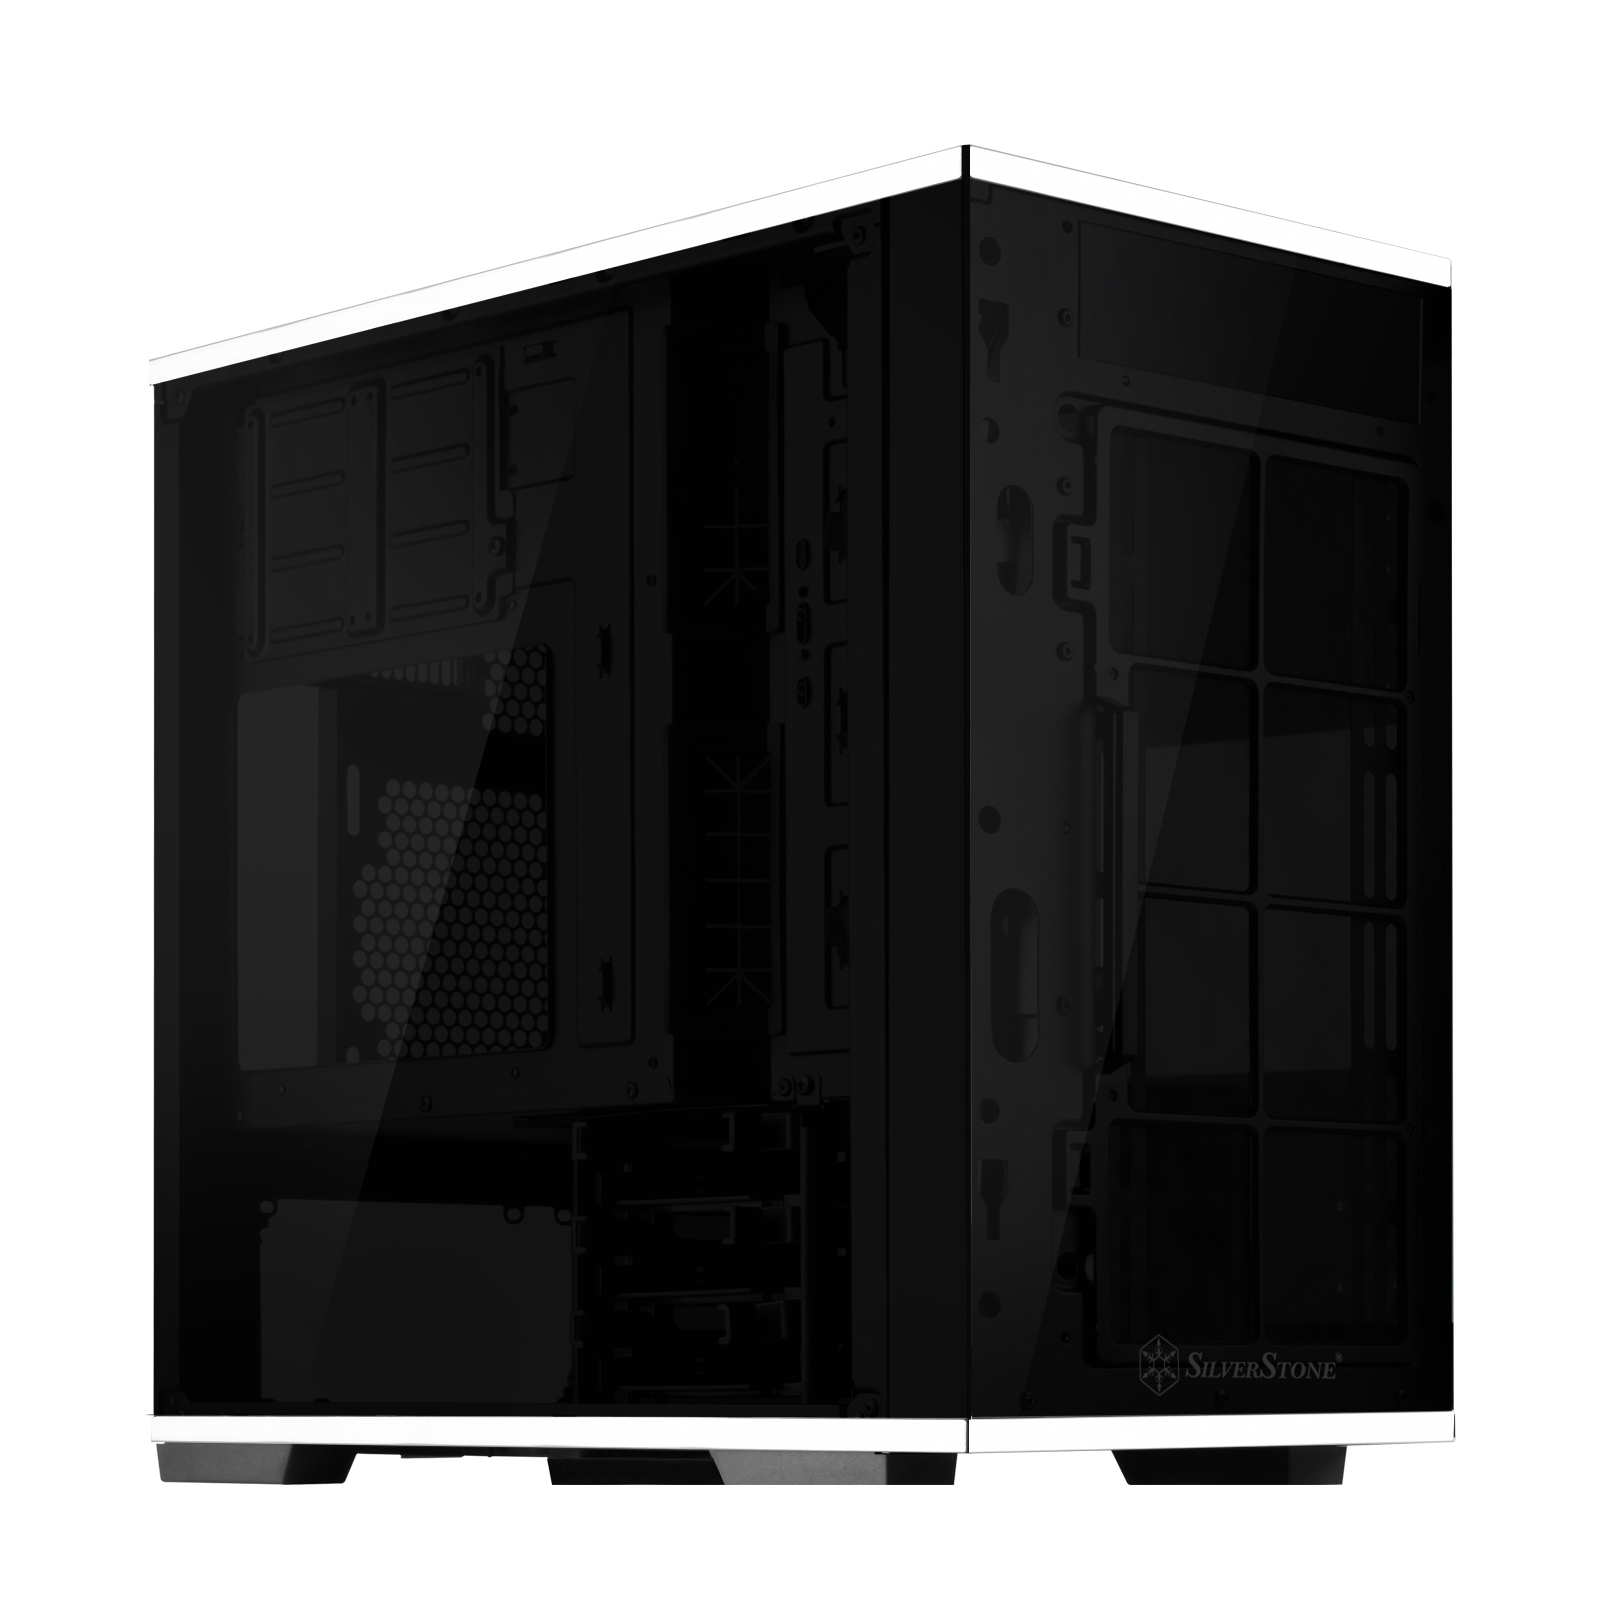  - Silverstone Lucid LD01B Micro-ATX Case - Stainless Steel & Tempered Glass